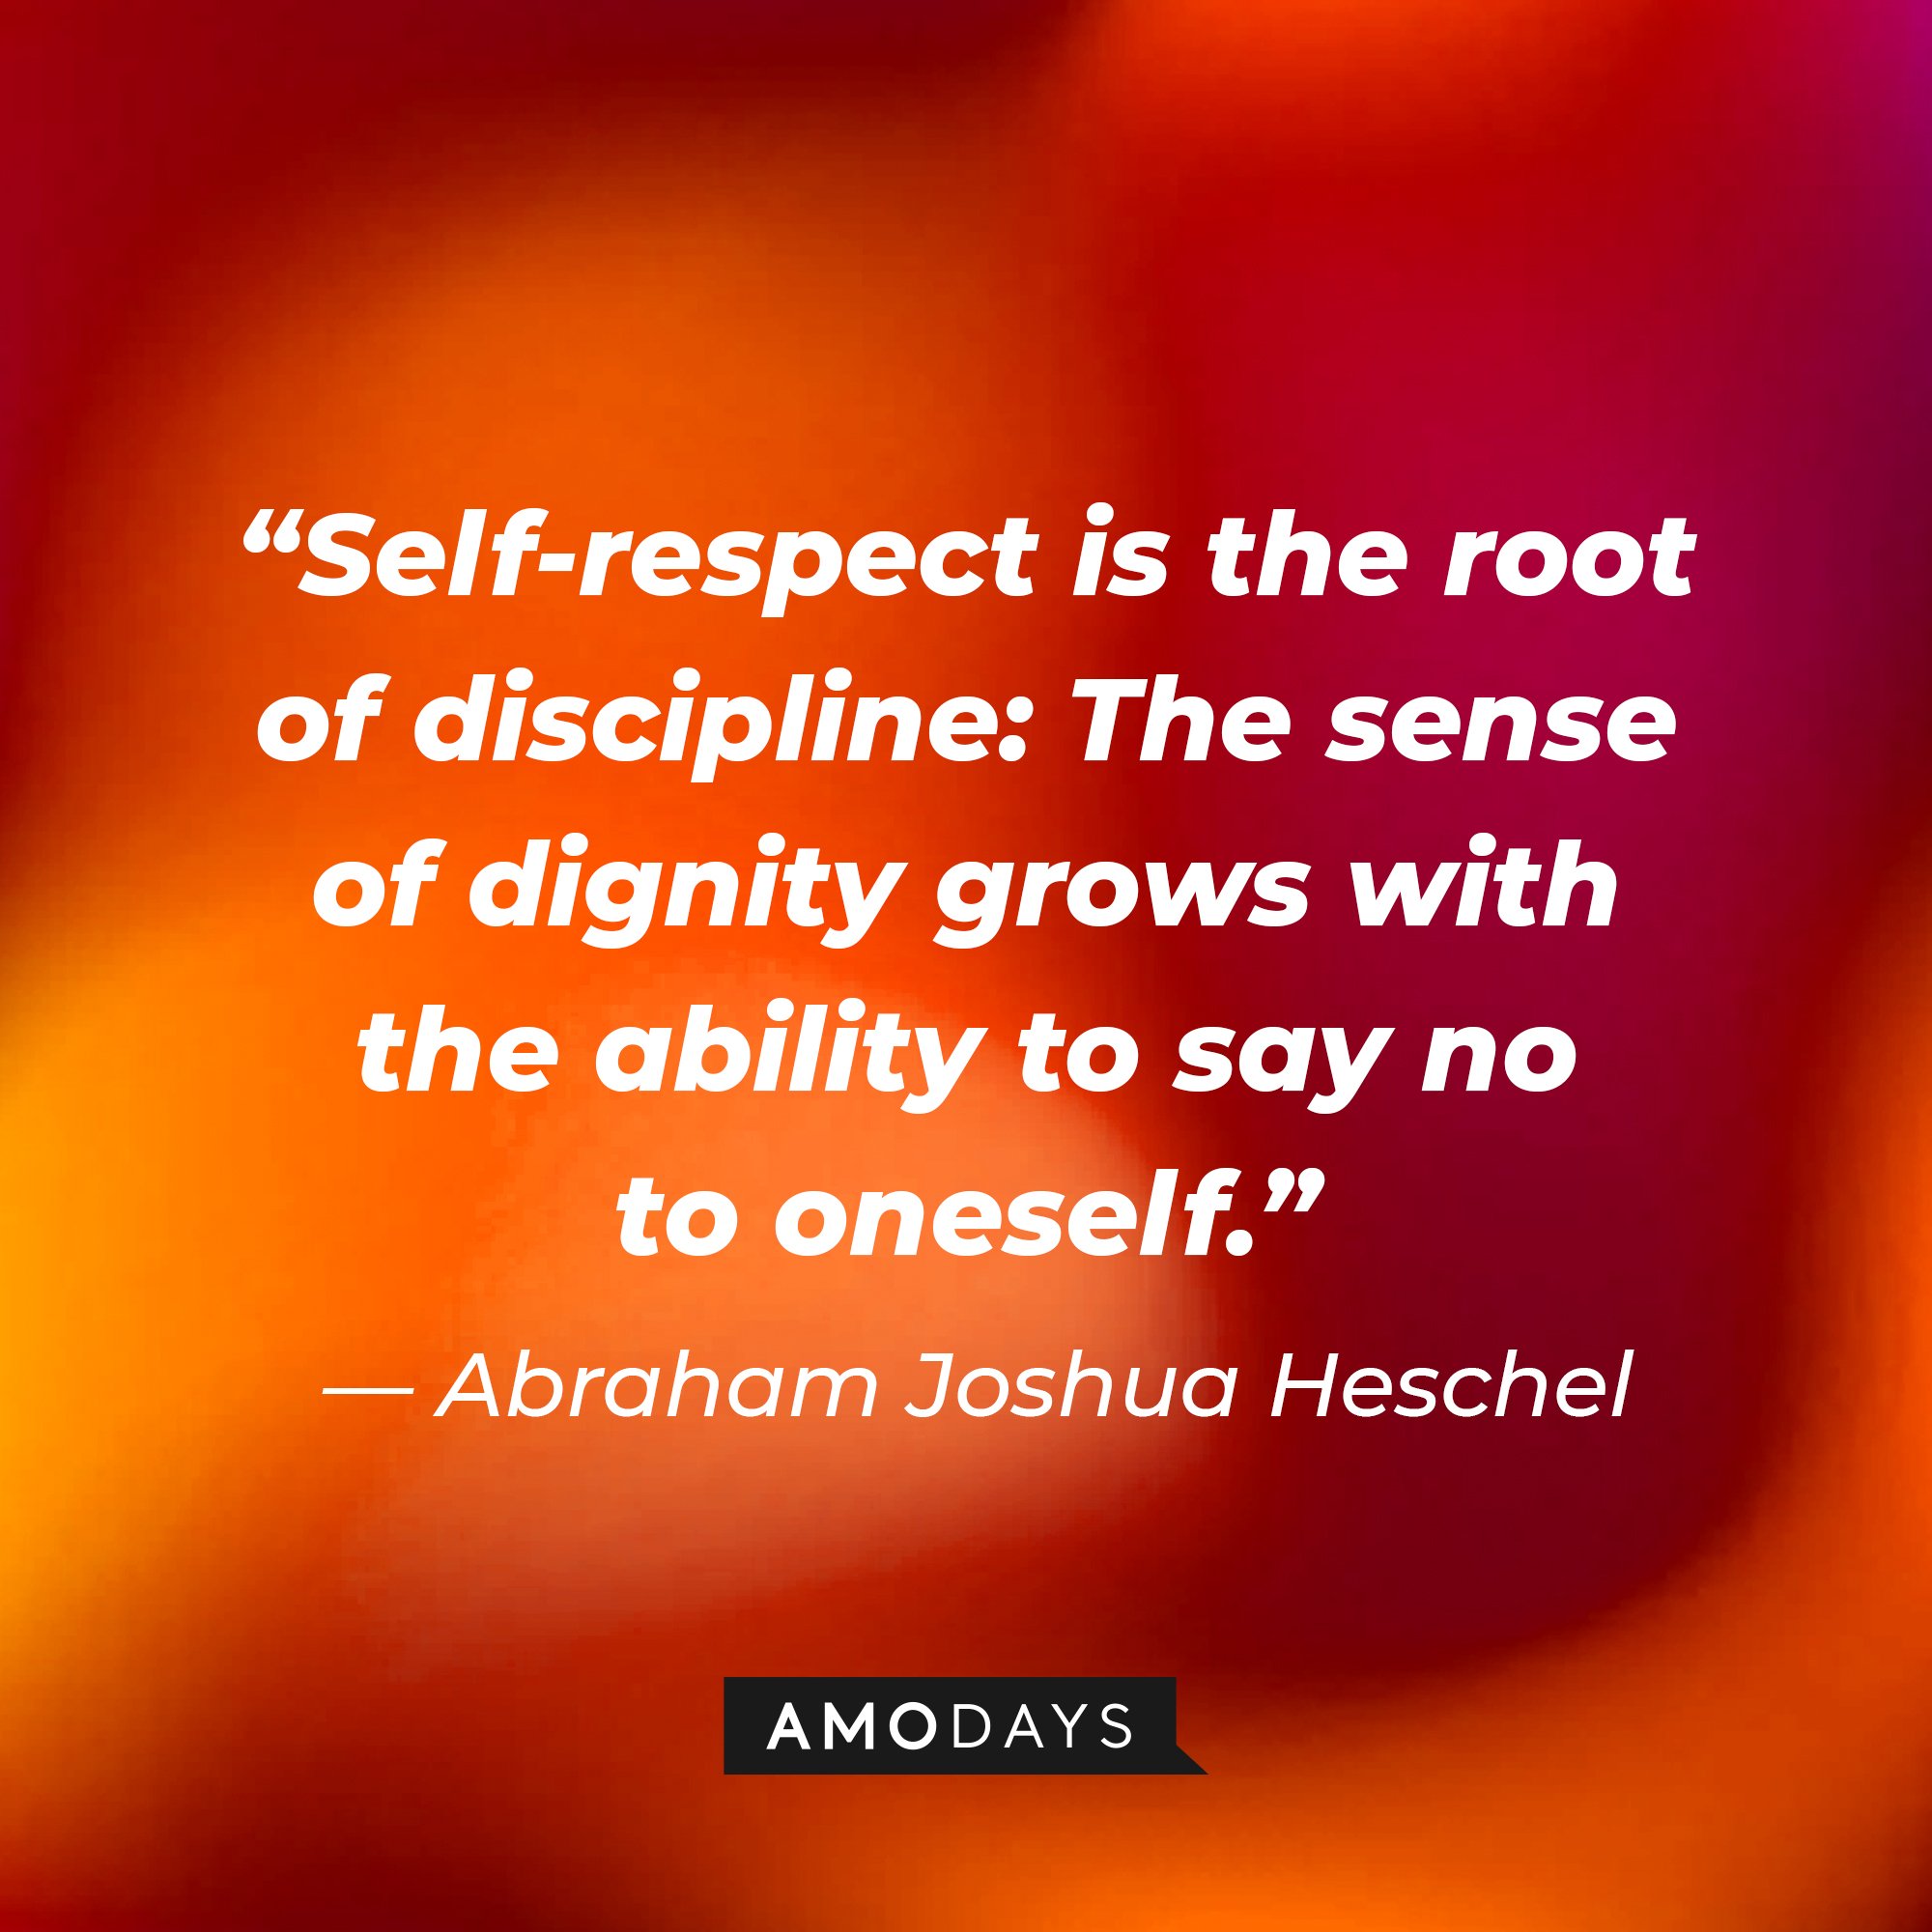 Abraham Joshua Heschel’s quote: “Self-respect is the root of discipline: The sense of dignity grows with the ability to say no to oneself.” | Image: AmoDays